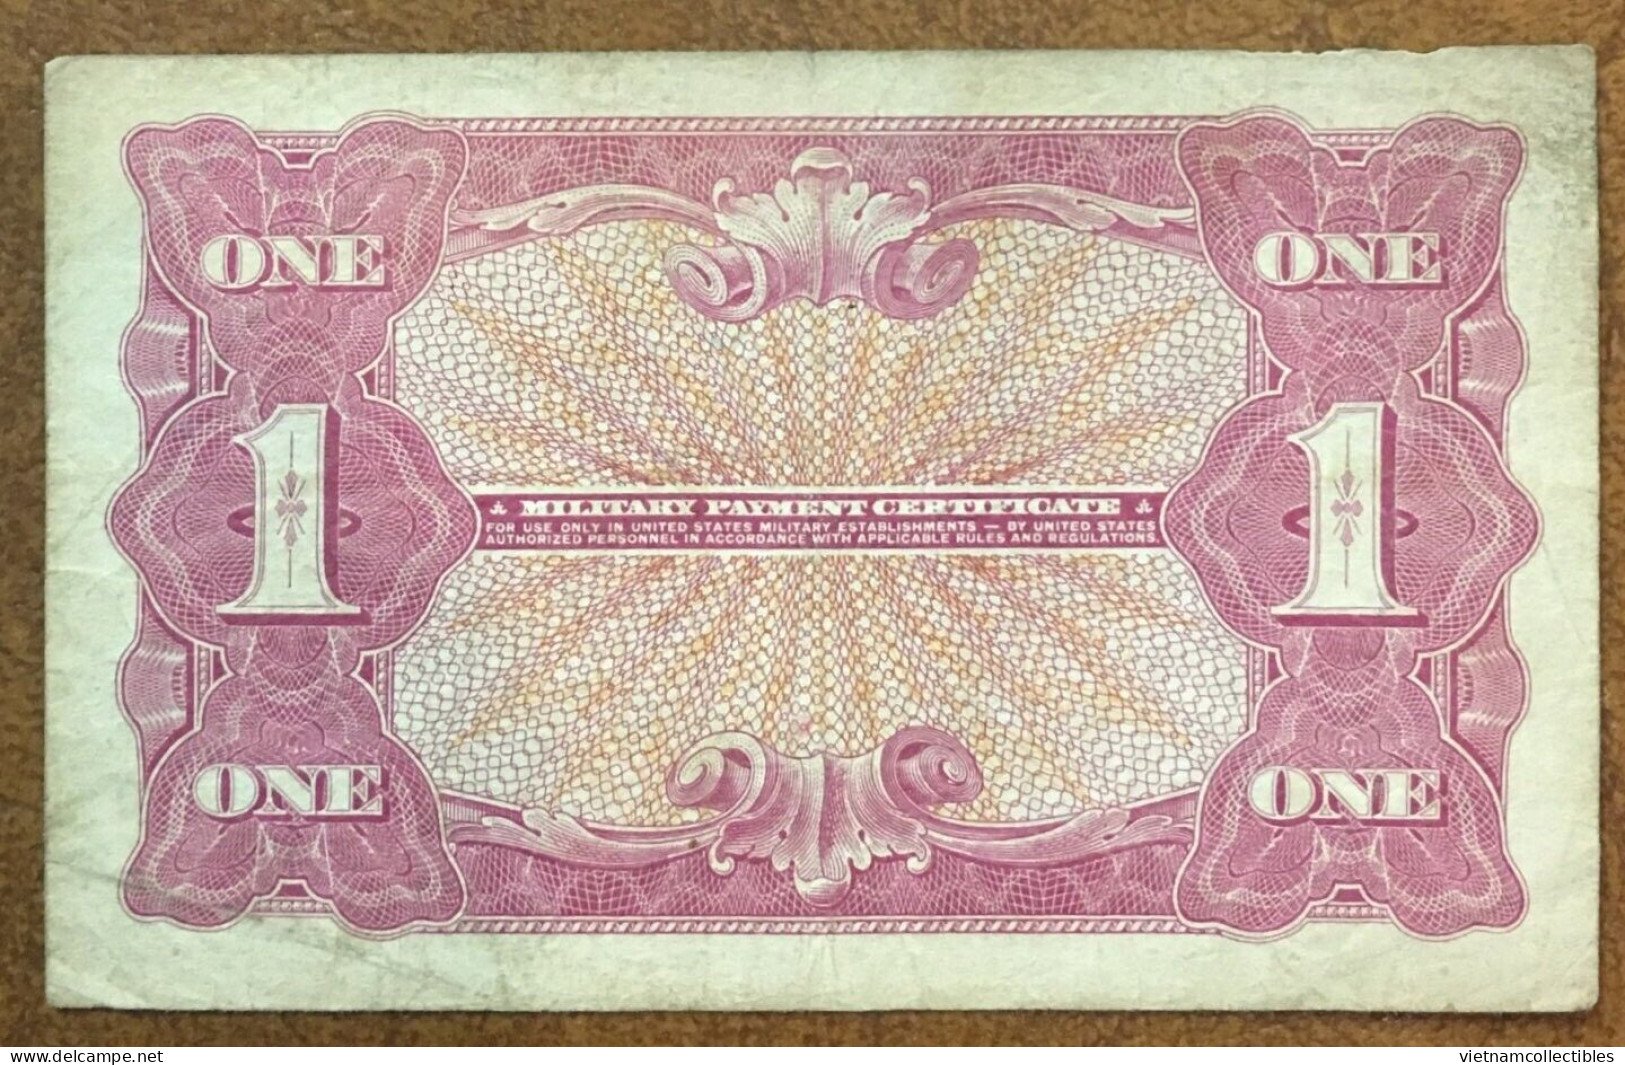 USA MPC One Dollar Military Payment Series 641 VF Banknote Note 1964 Using In Vietnam Viet Nam - Plate # 17 / 2 Photos - 1965-1968 - Reeksen 641